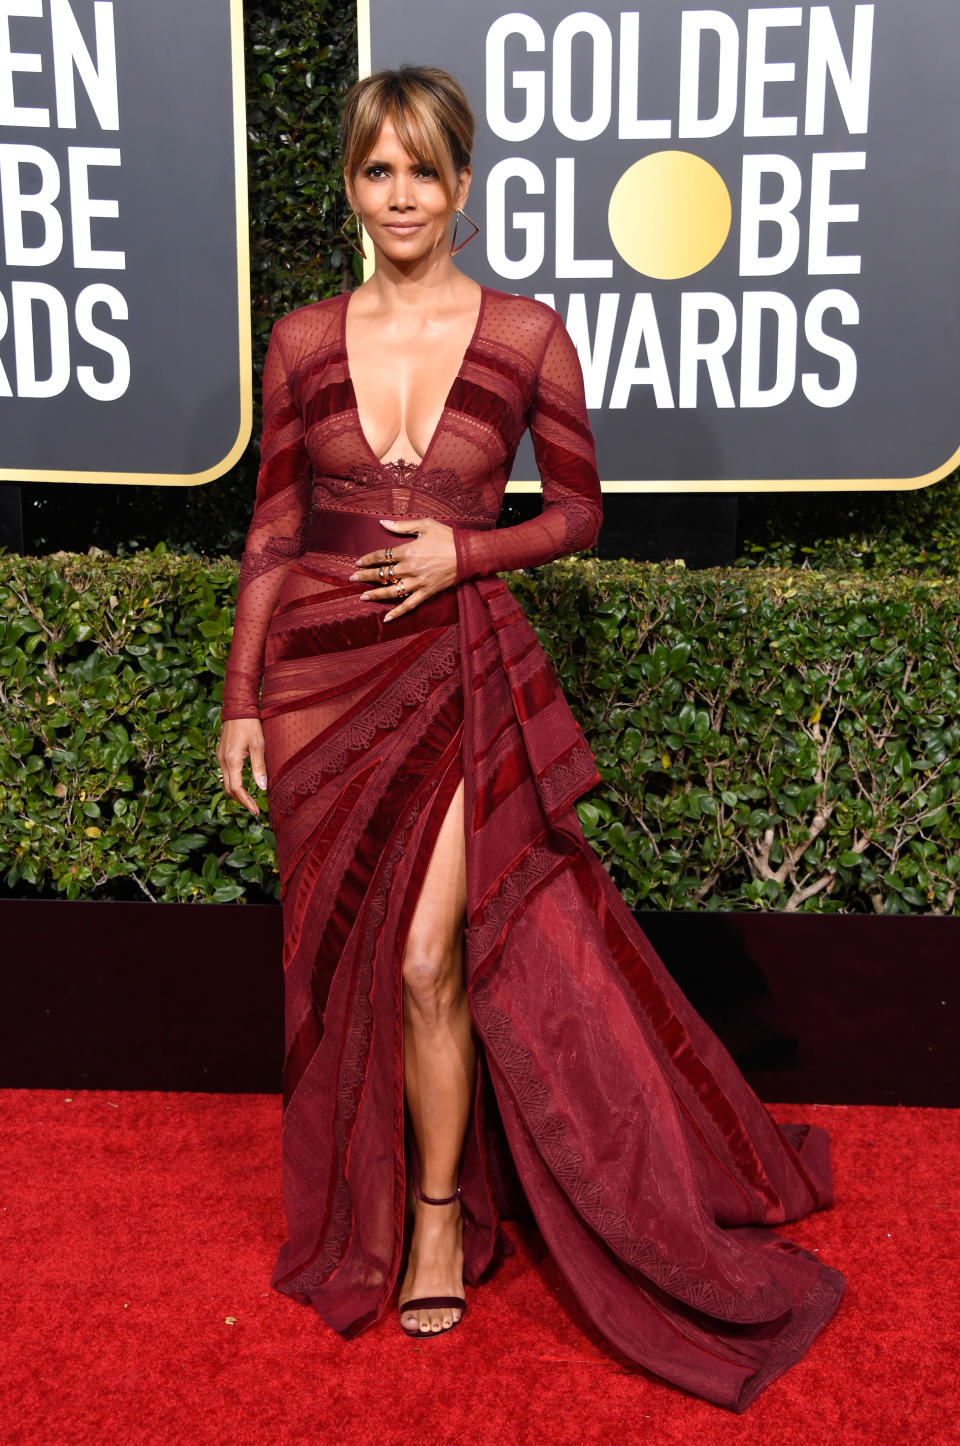 <p>The 52-year-old Oscar winner wowed the crowd in a burgundy dress by Zuhair Murad.<br>Image via Getty Images. </p>